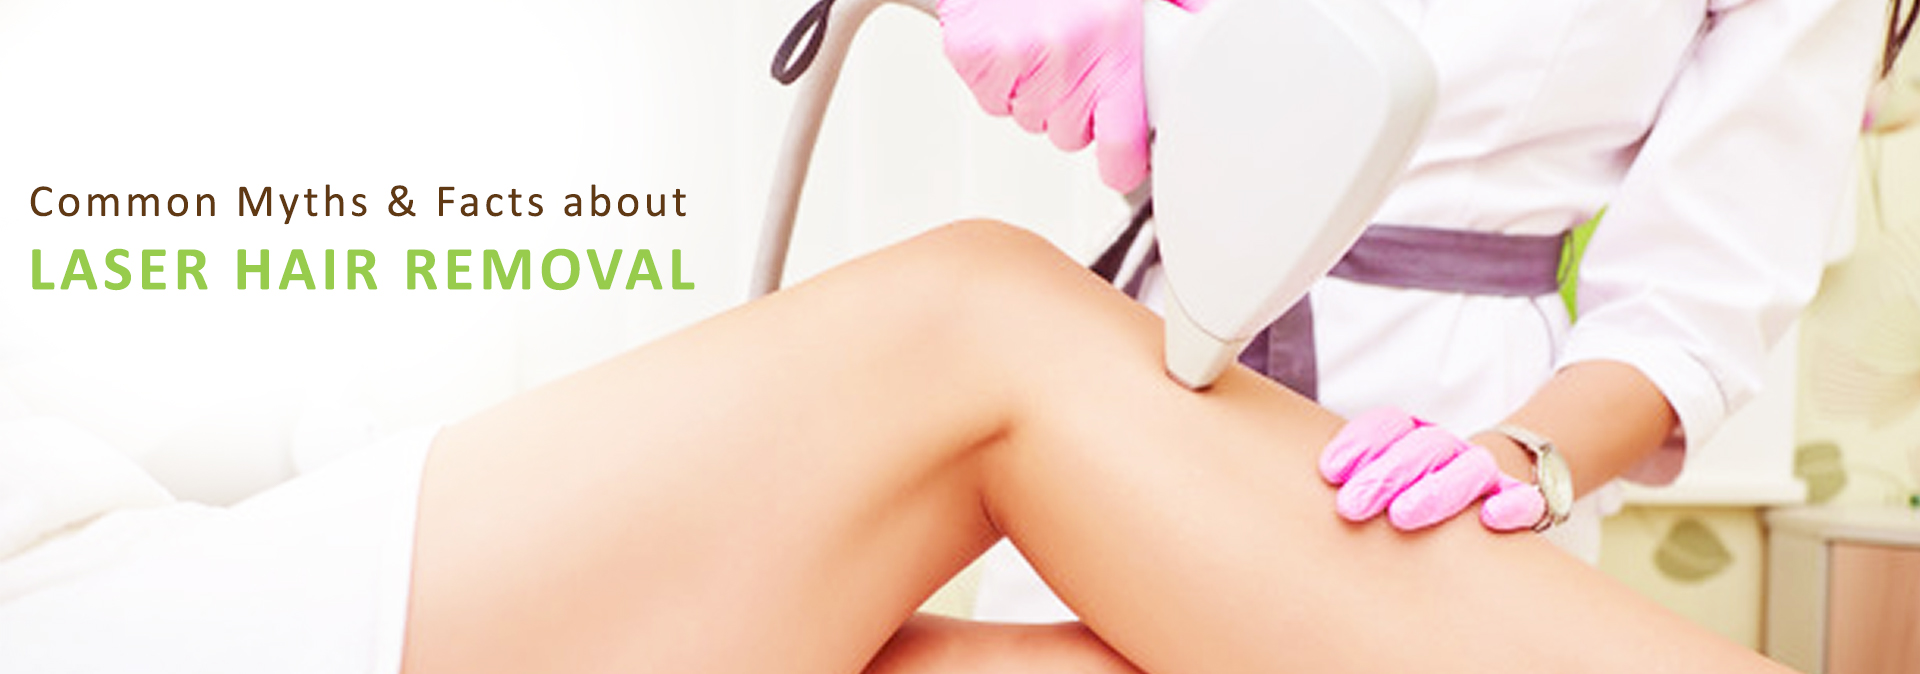 Common myths and facts about laser hair removal